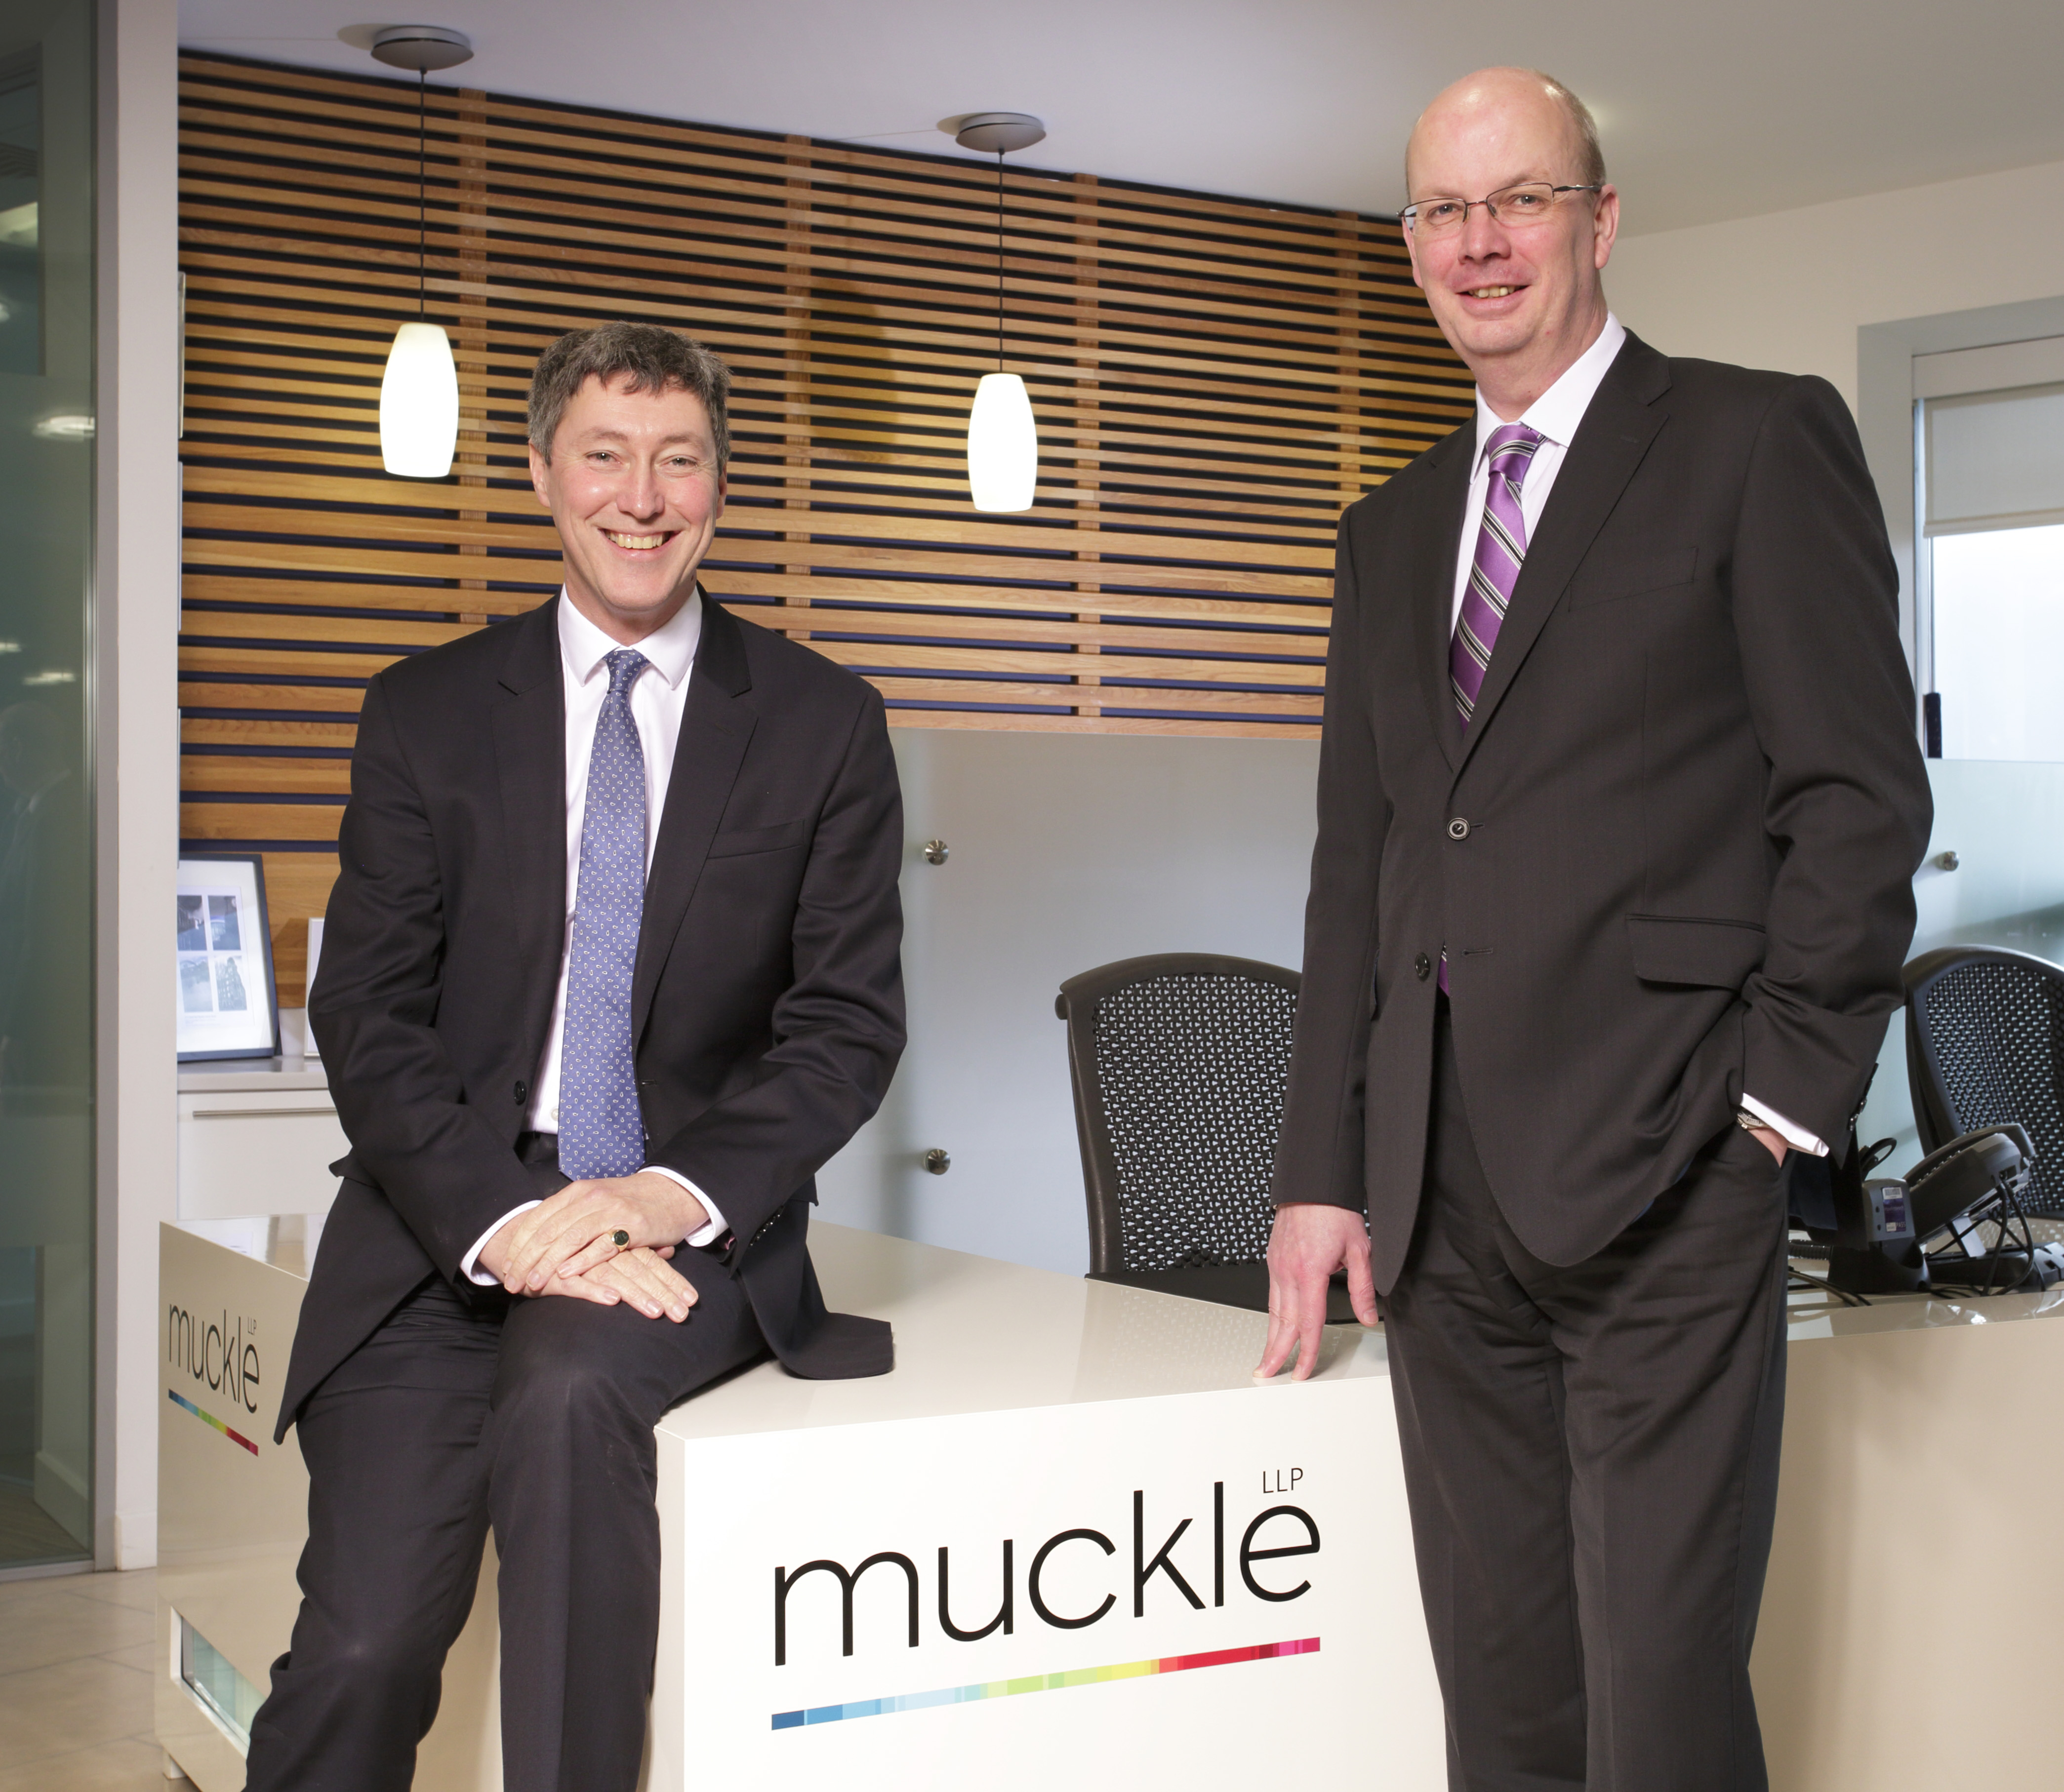 Andrew Davison (left) and Mike Spetch (right) of Muckle LLP